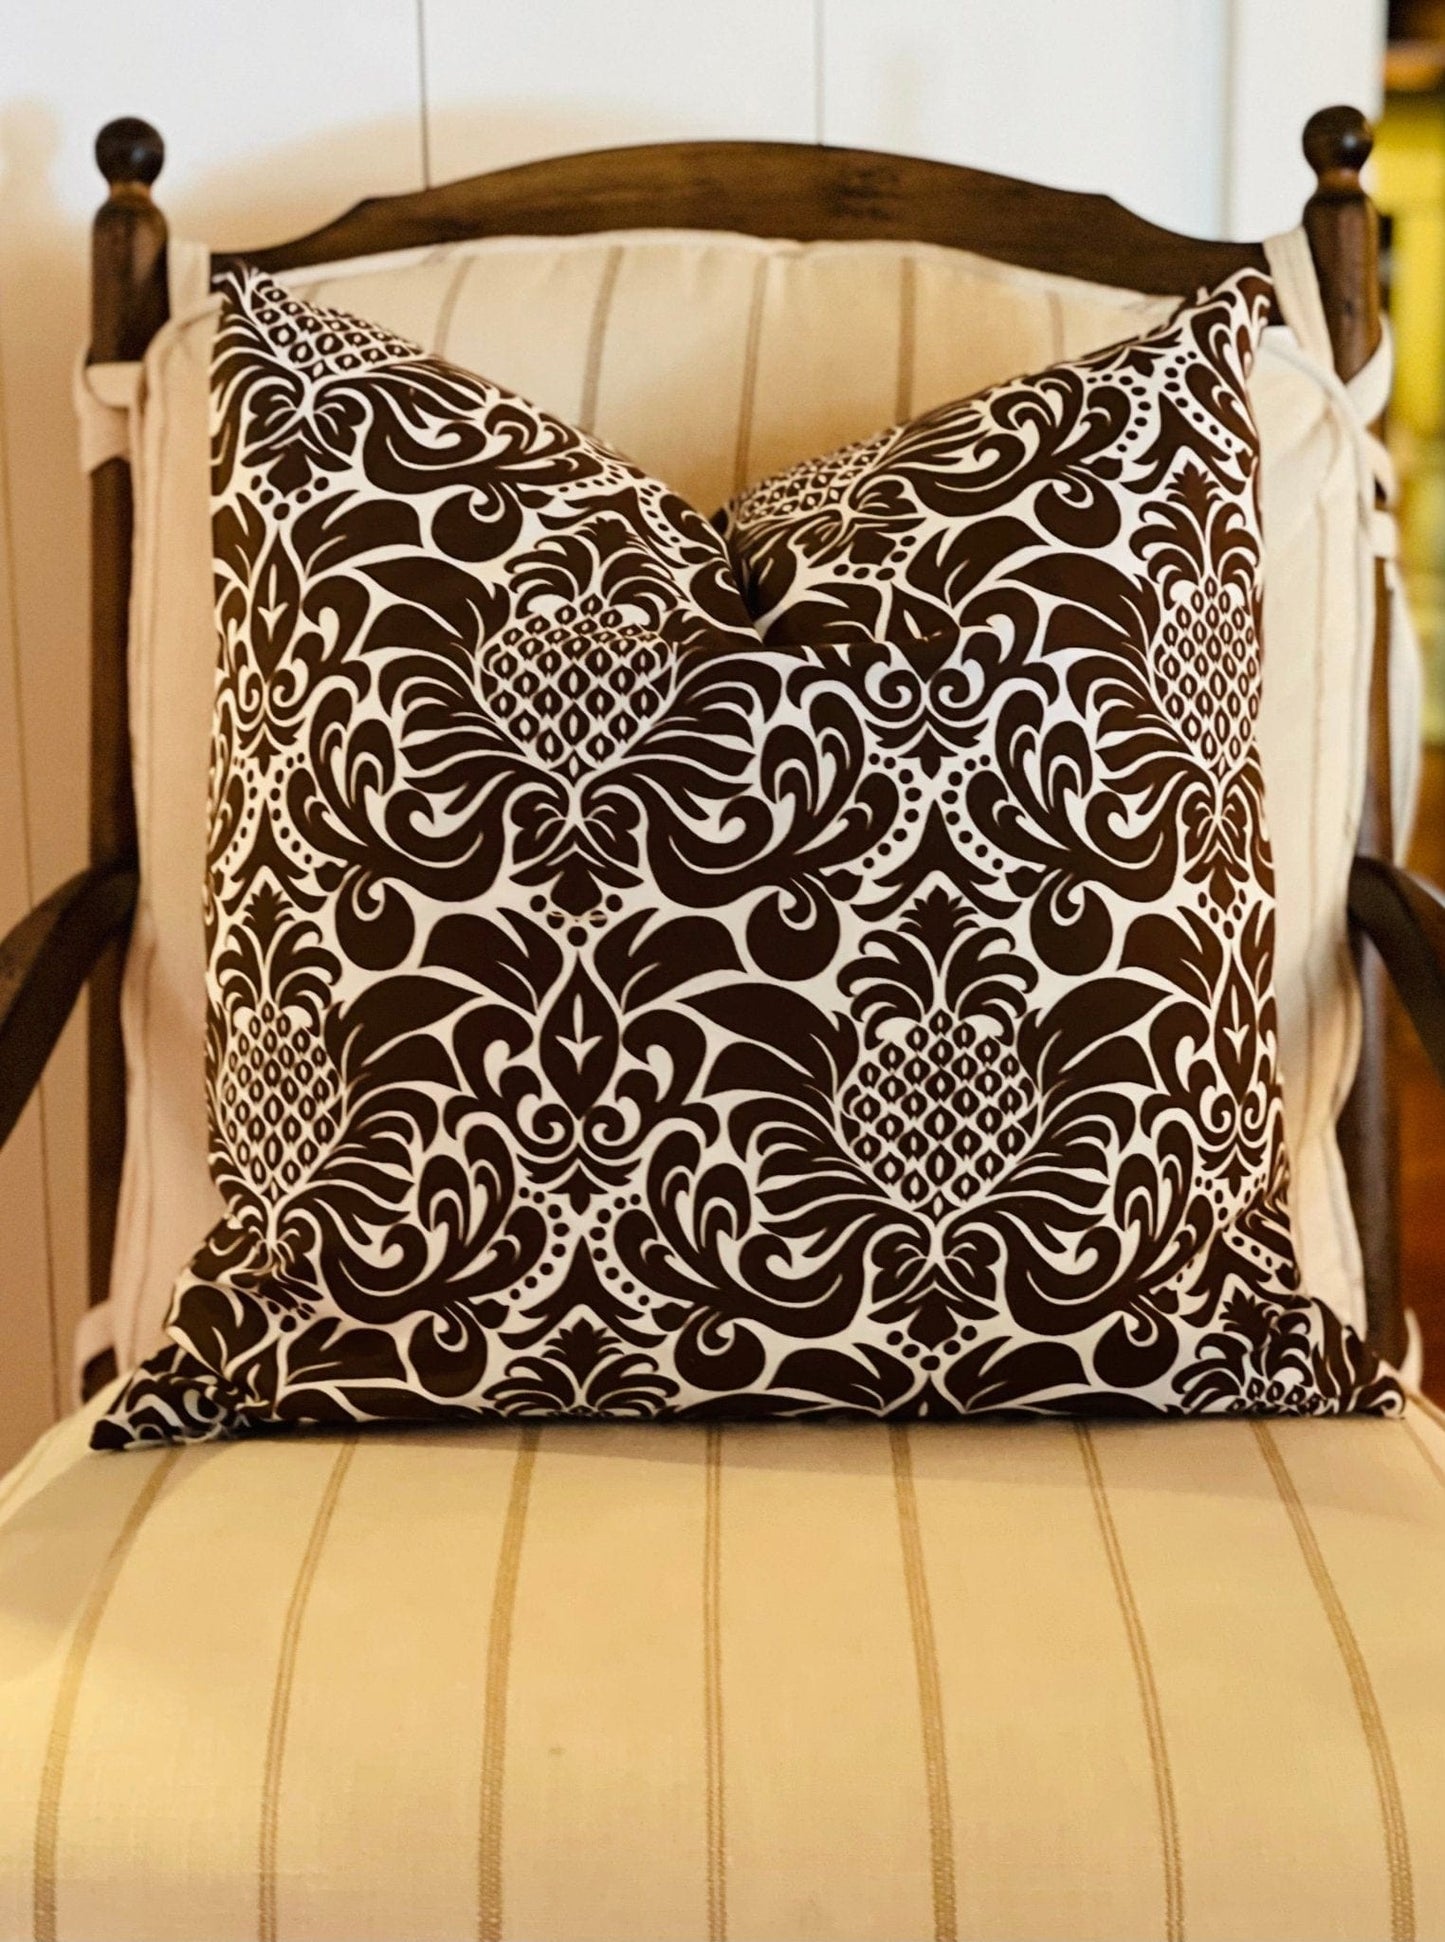 Hen House Linens gracious chocolate brown printed cloth 20" x 20" pillow covers